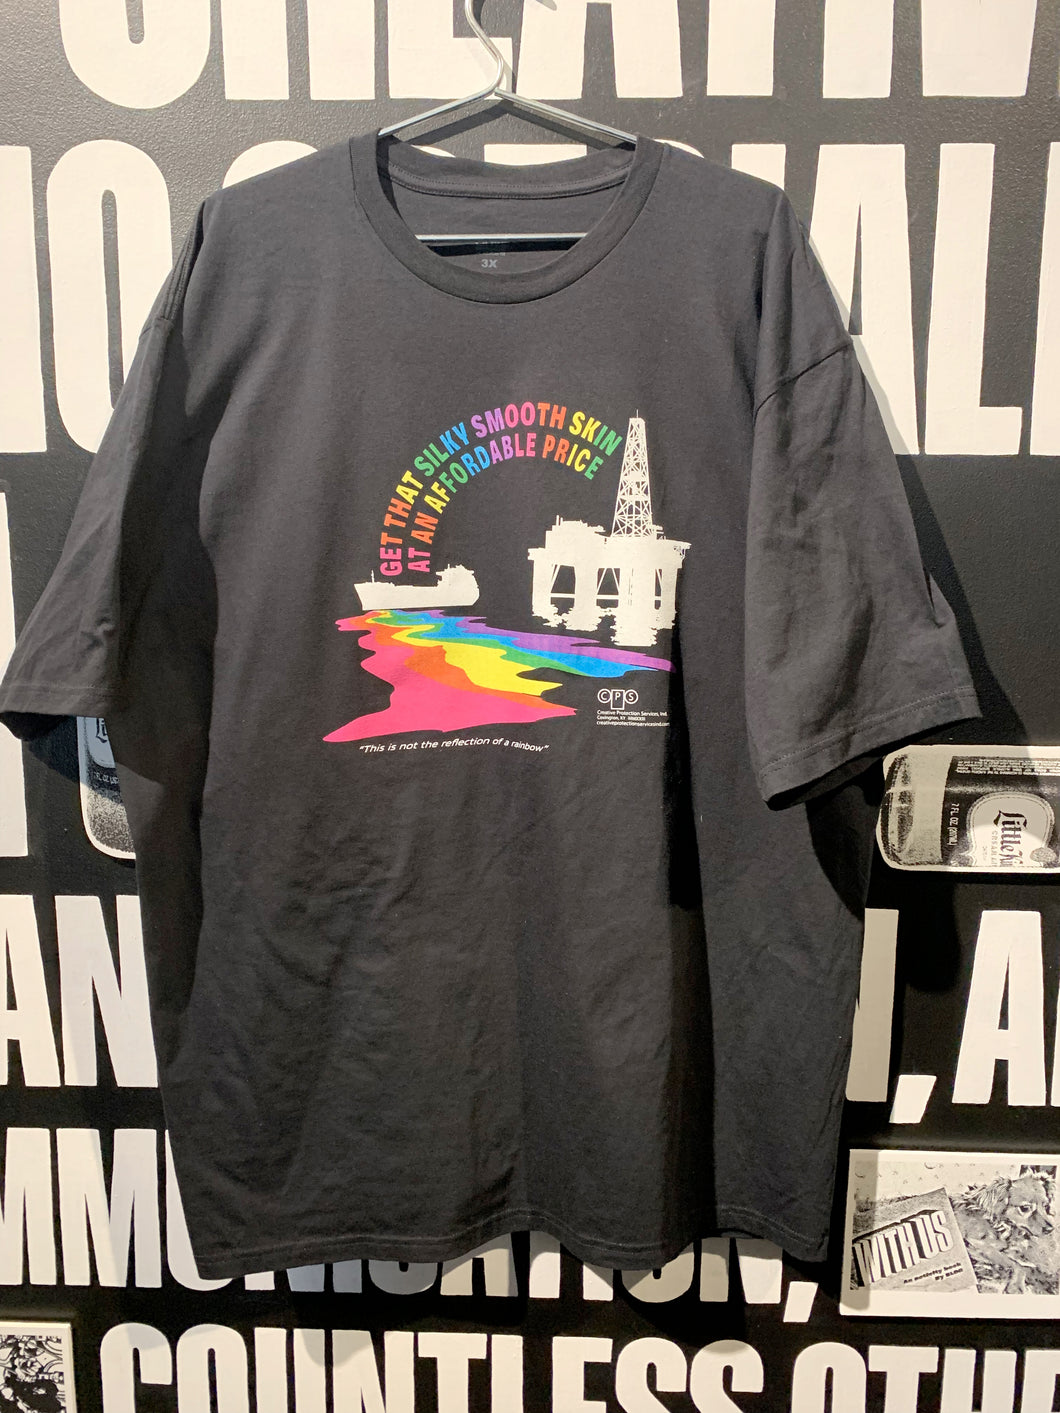 This is Not the Reflection of a Rainbow (black t-shirt)